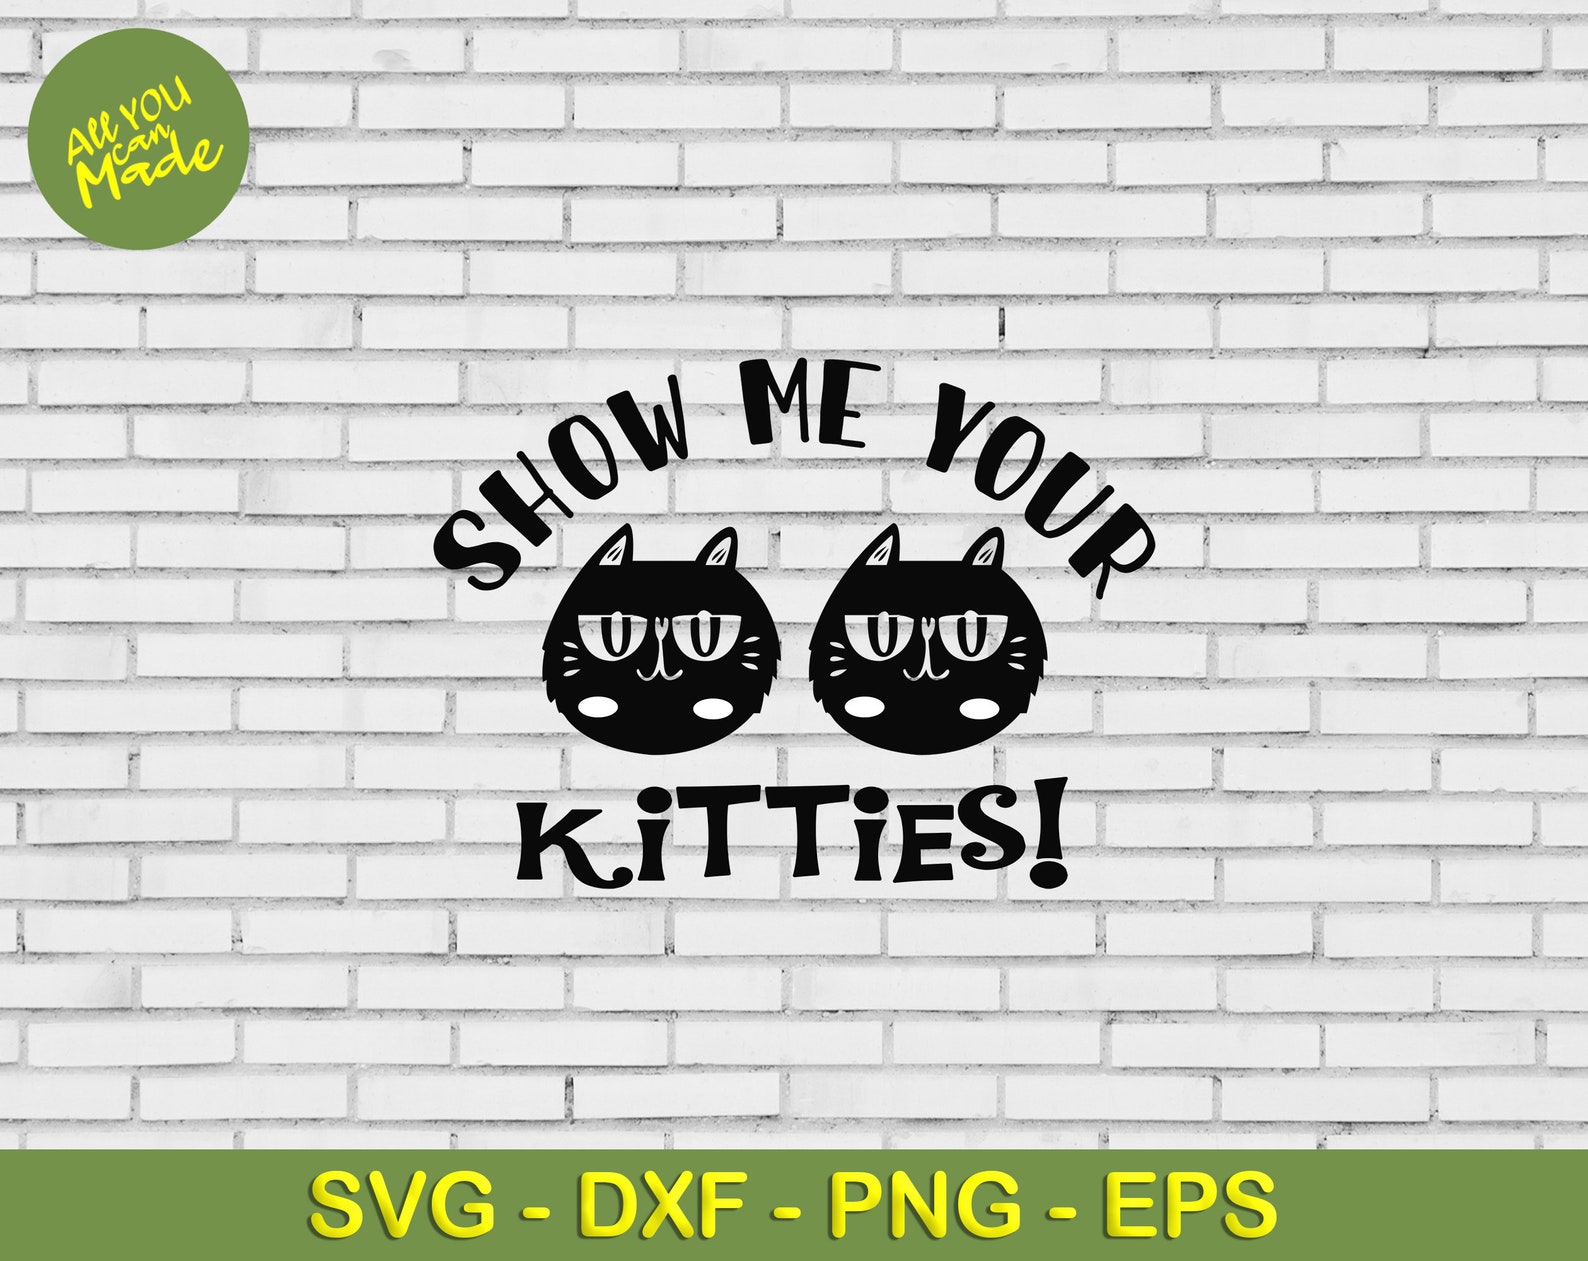 Show me your kitties svg eps dxf png file sublimation love | Etsy